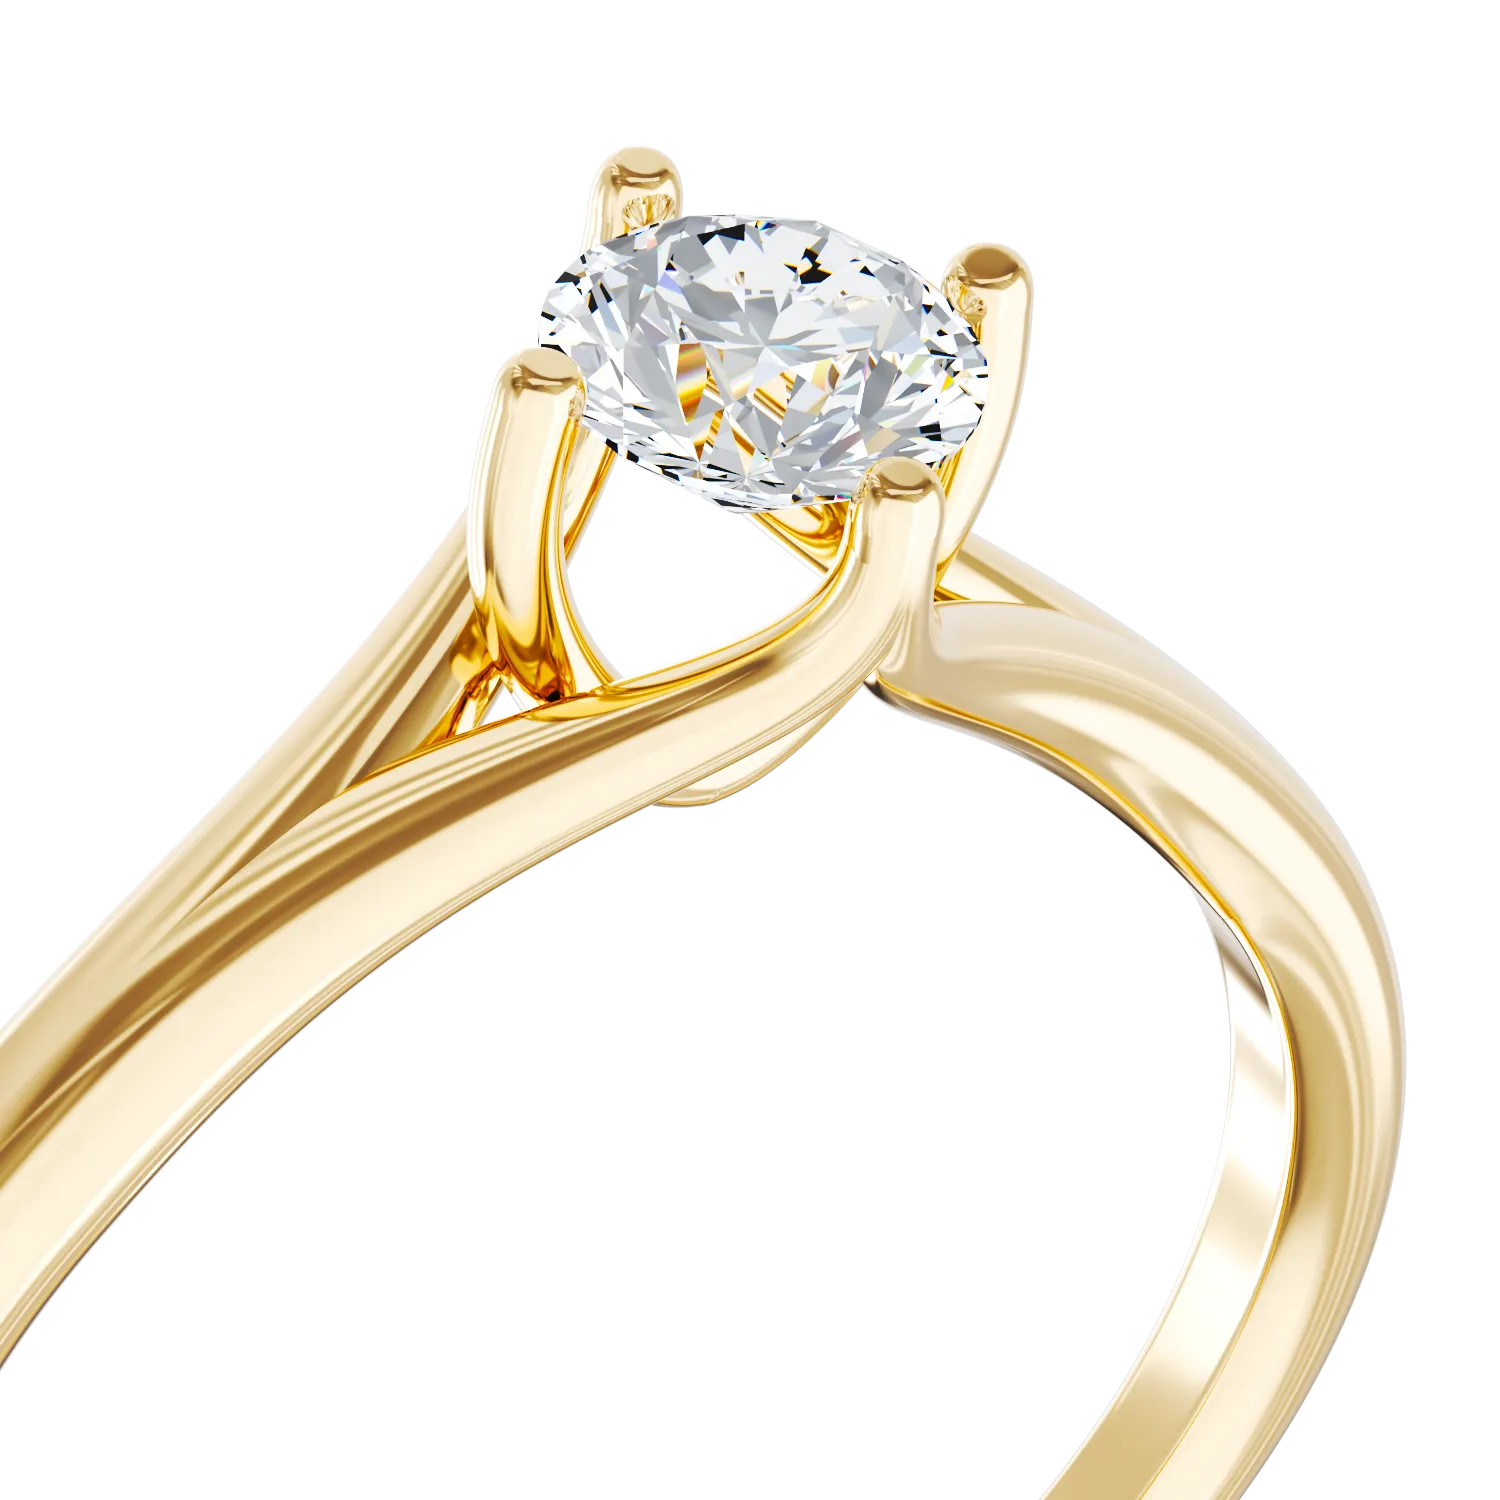 18K yellow gold engagement ring with 0.2ct diamond